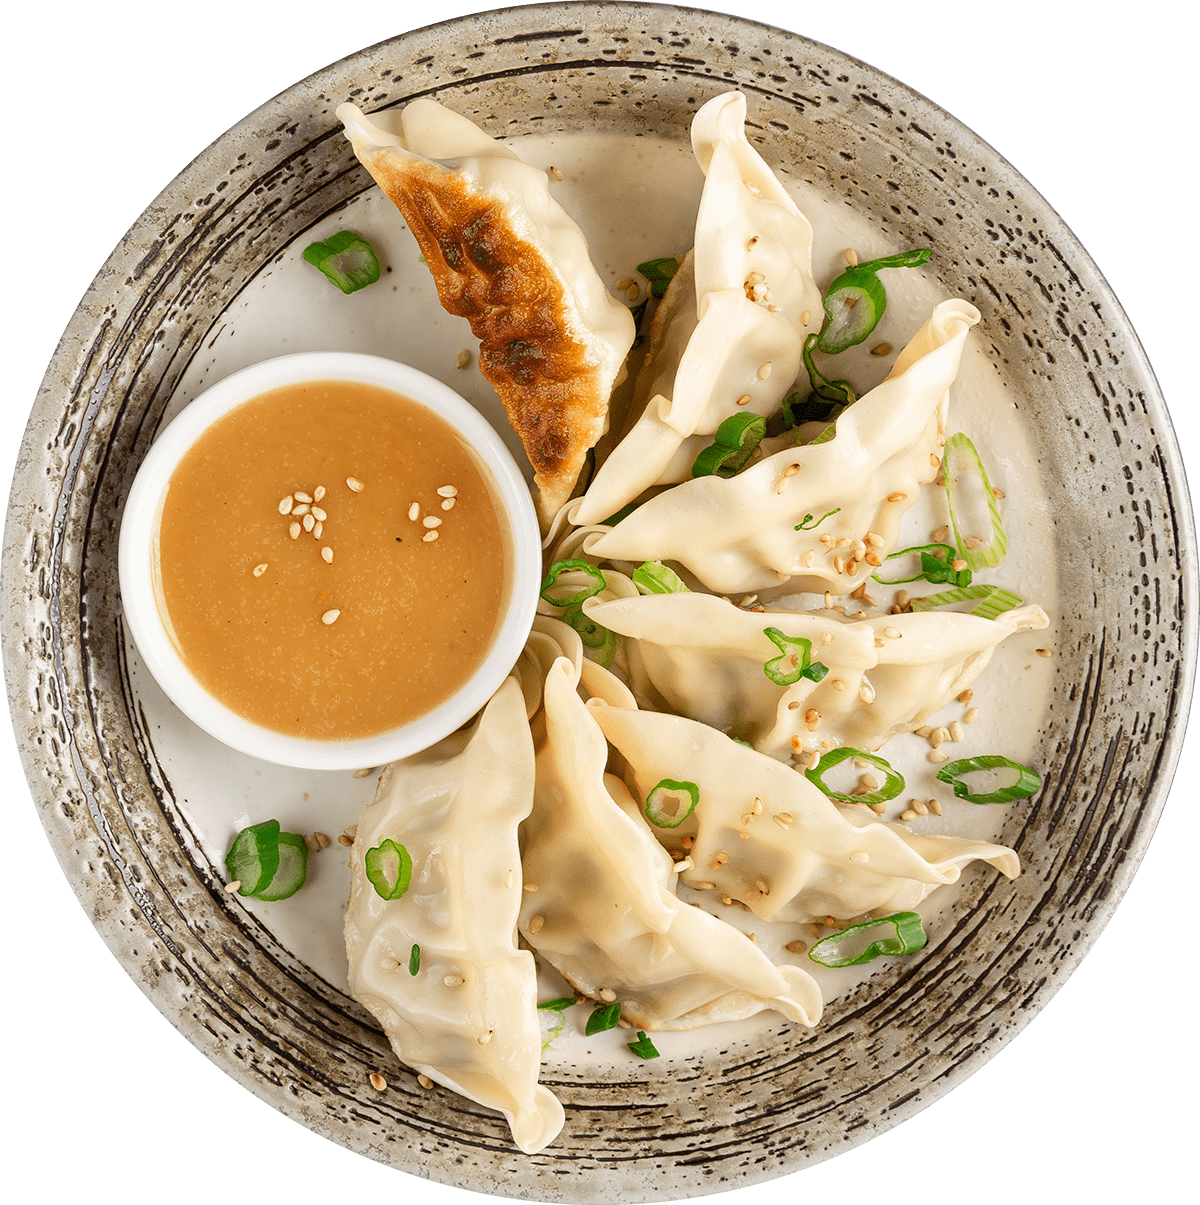 Gyoza on a plate with green onions and sauce